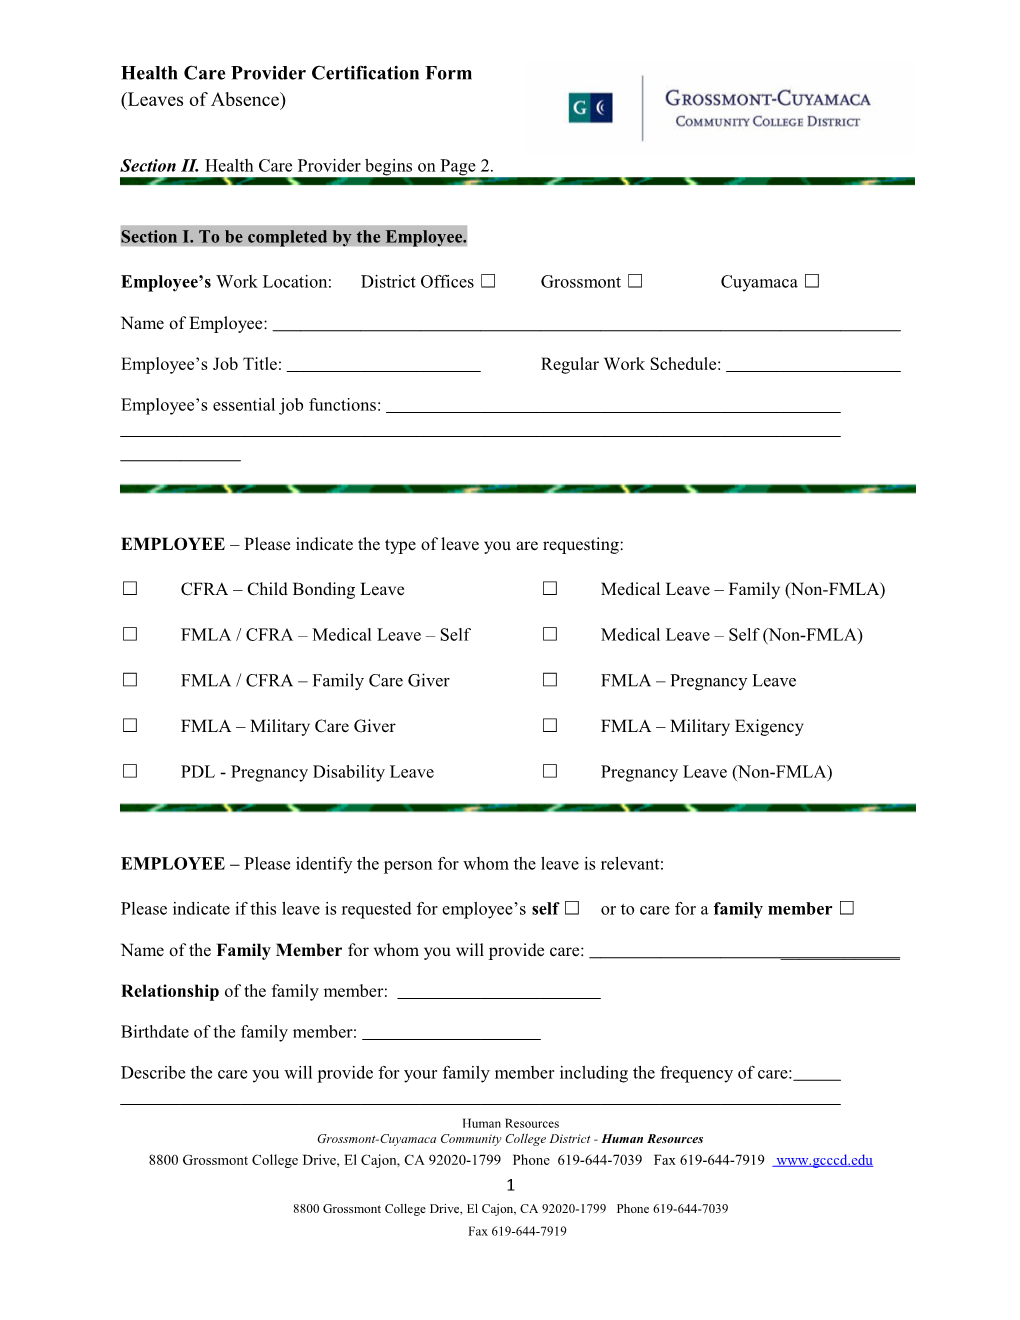 Health Care Provider Certification Form